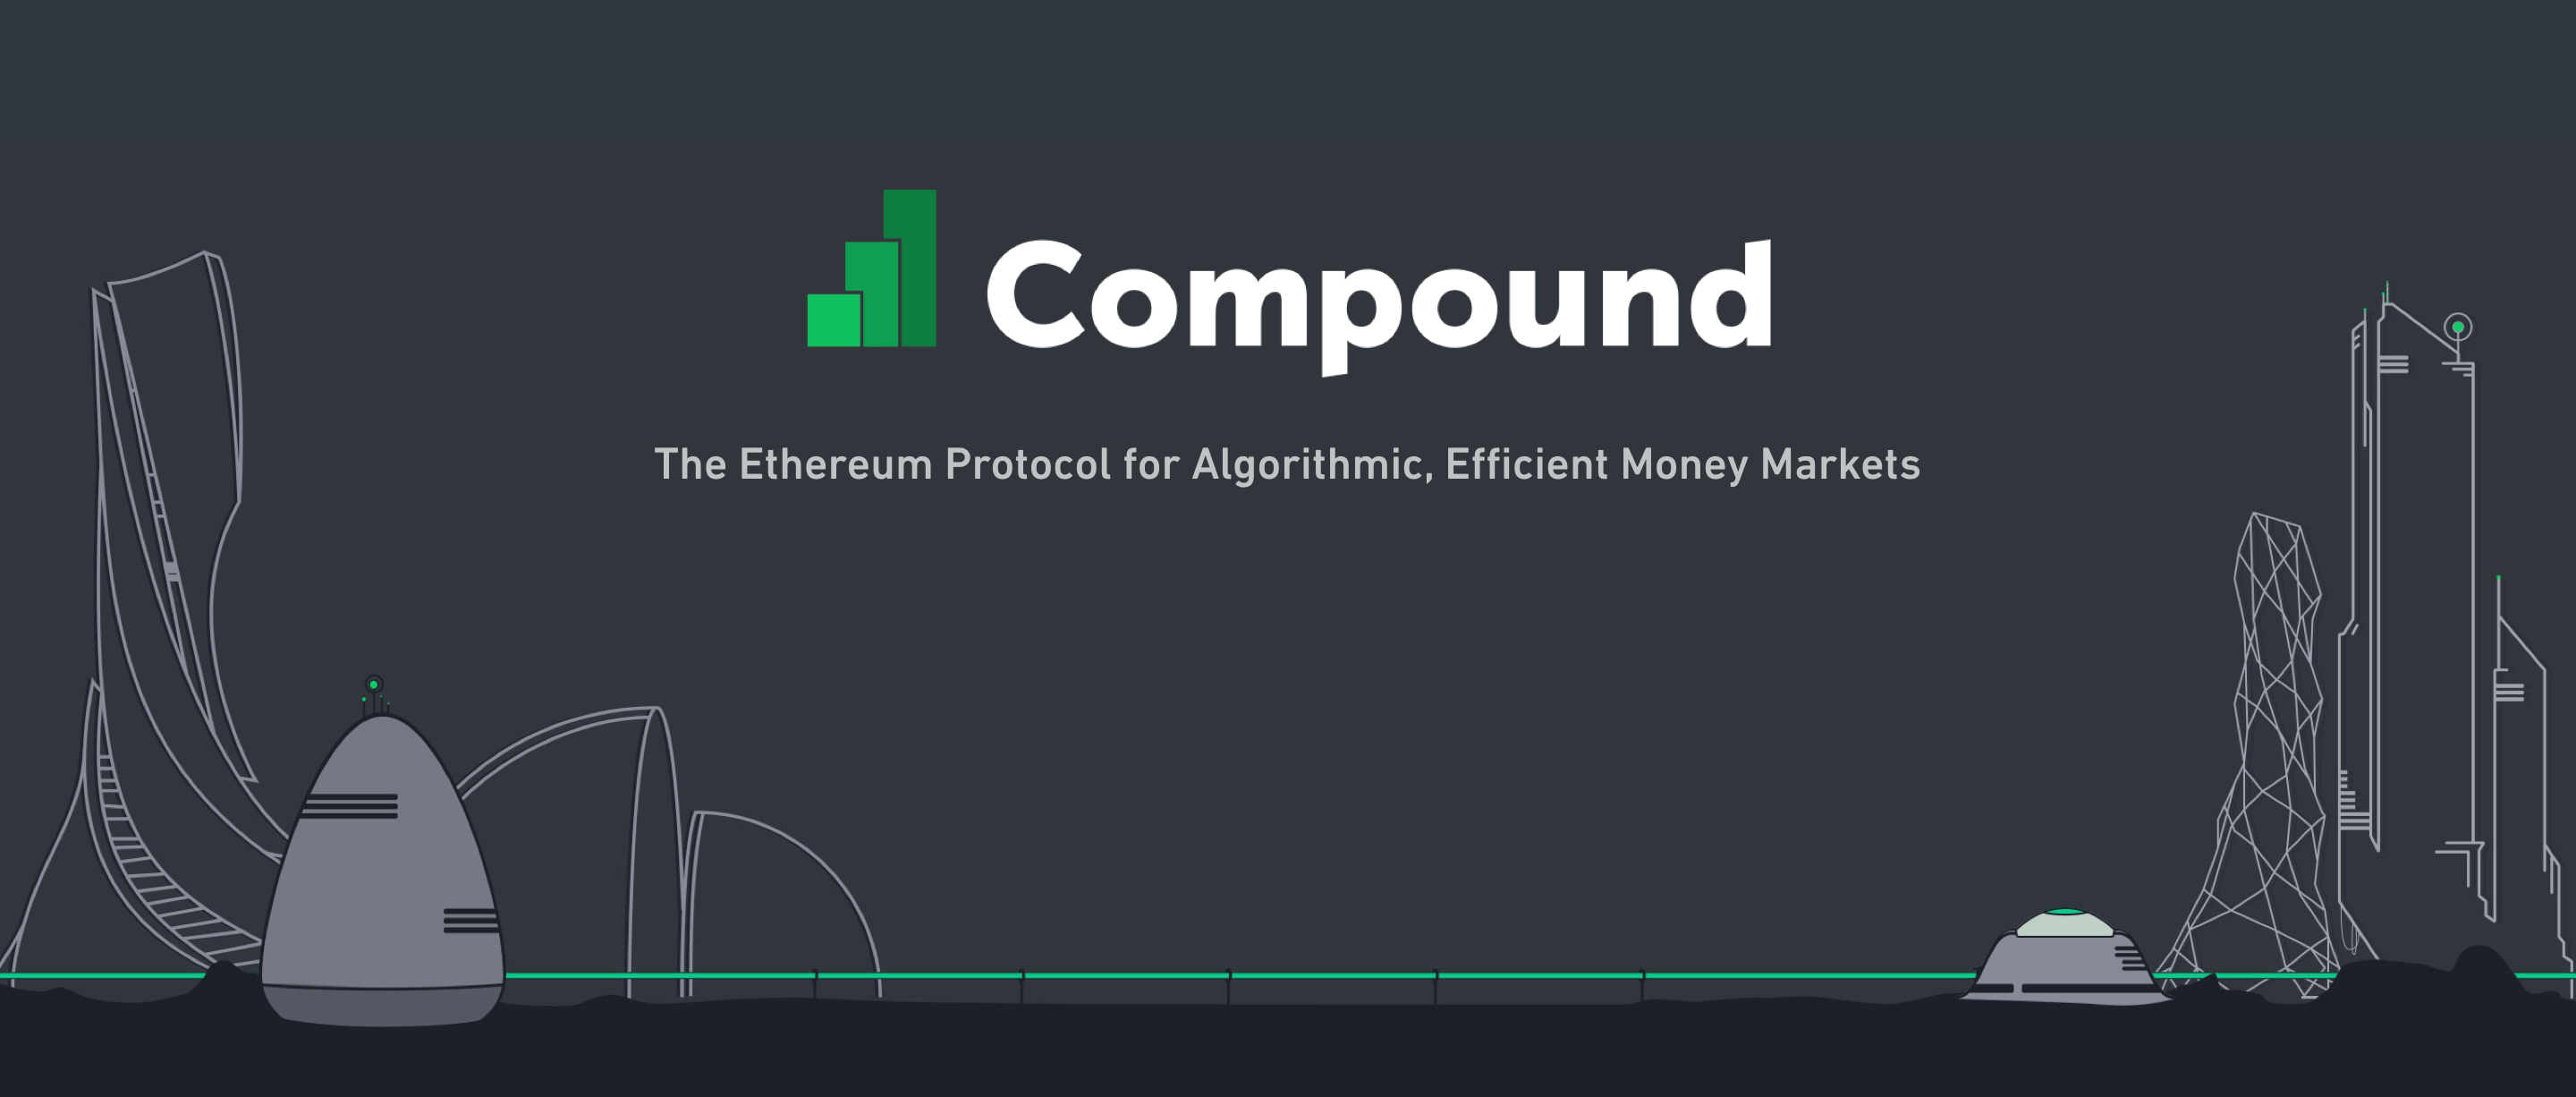 how to earn compound interest on crypto